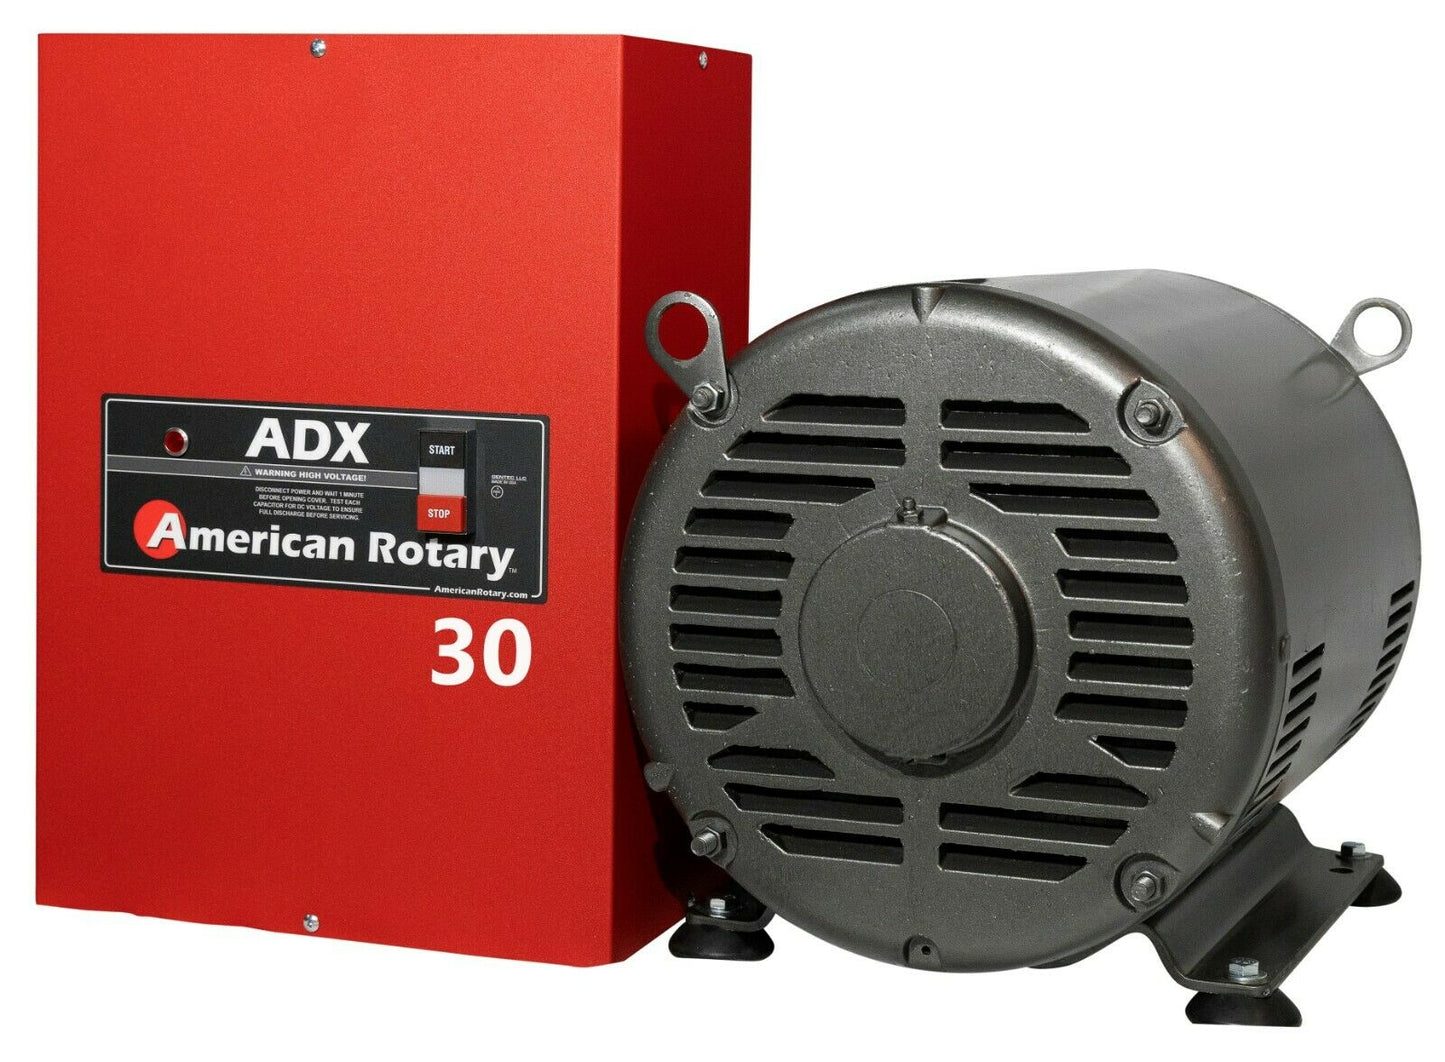 LIMITED EDITION Extreme Duty American Rotary Phase Converter ADX30 30HP 1 a 3 fases CONVERTIDOR DE 1 A 3 FASES (TRIFASICO)